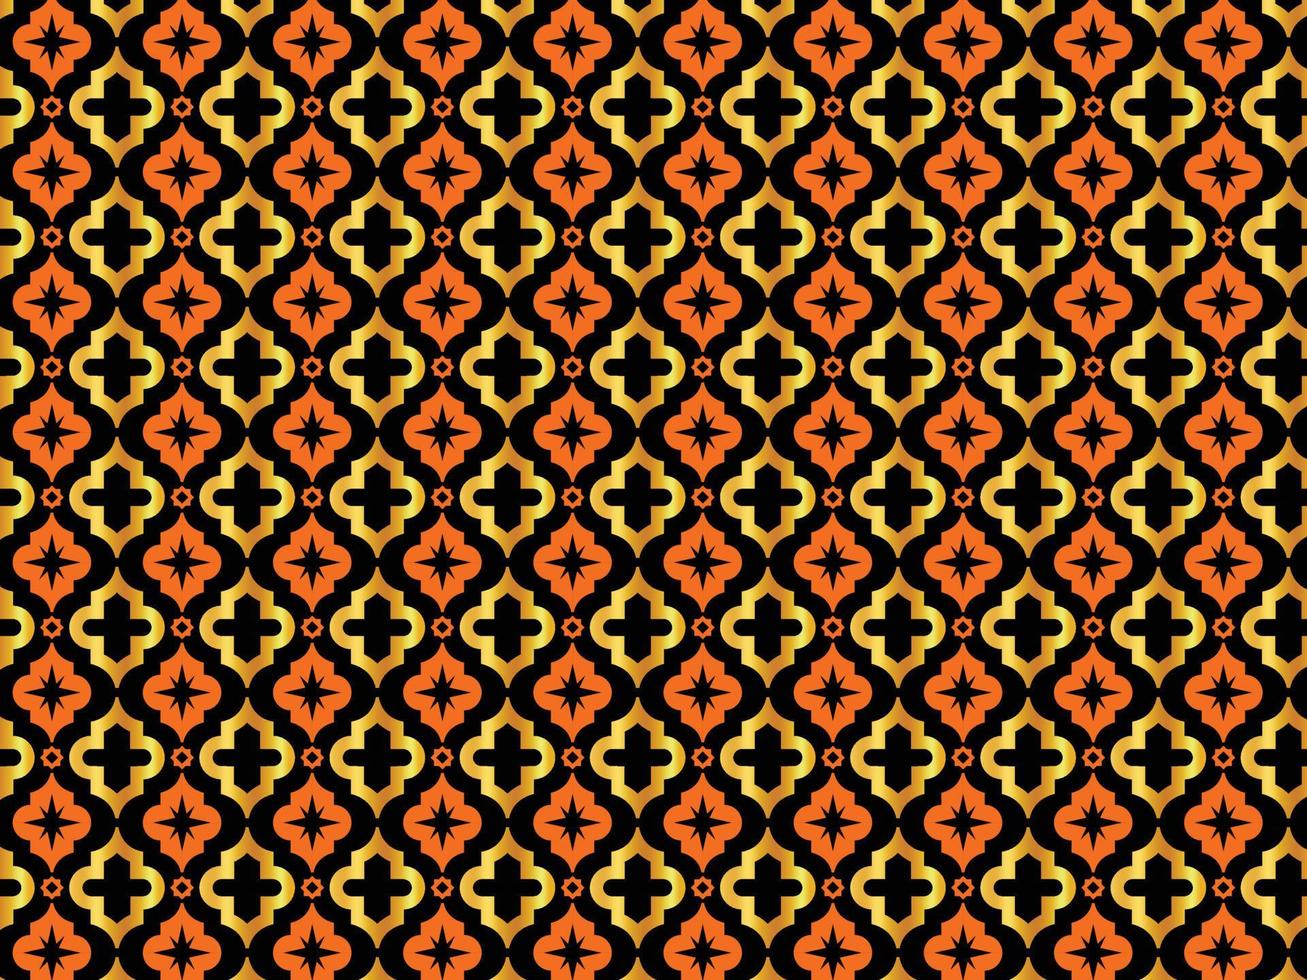 Golden arabic pattern. Vector illustration suitable for background, wallpaper, poster, fabric, wrapping, card, etc